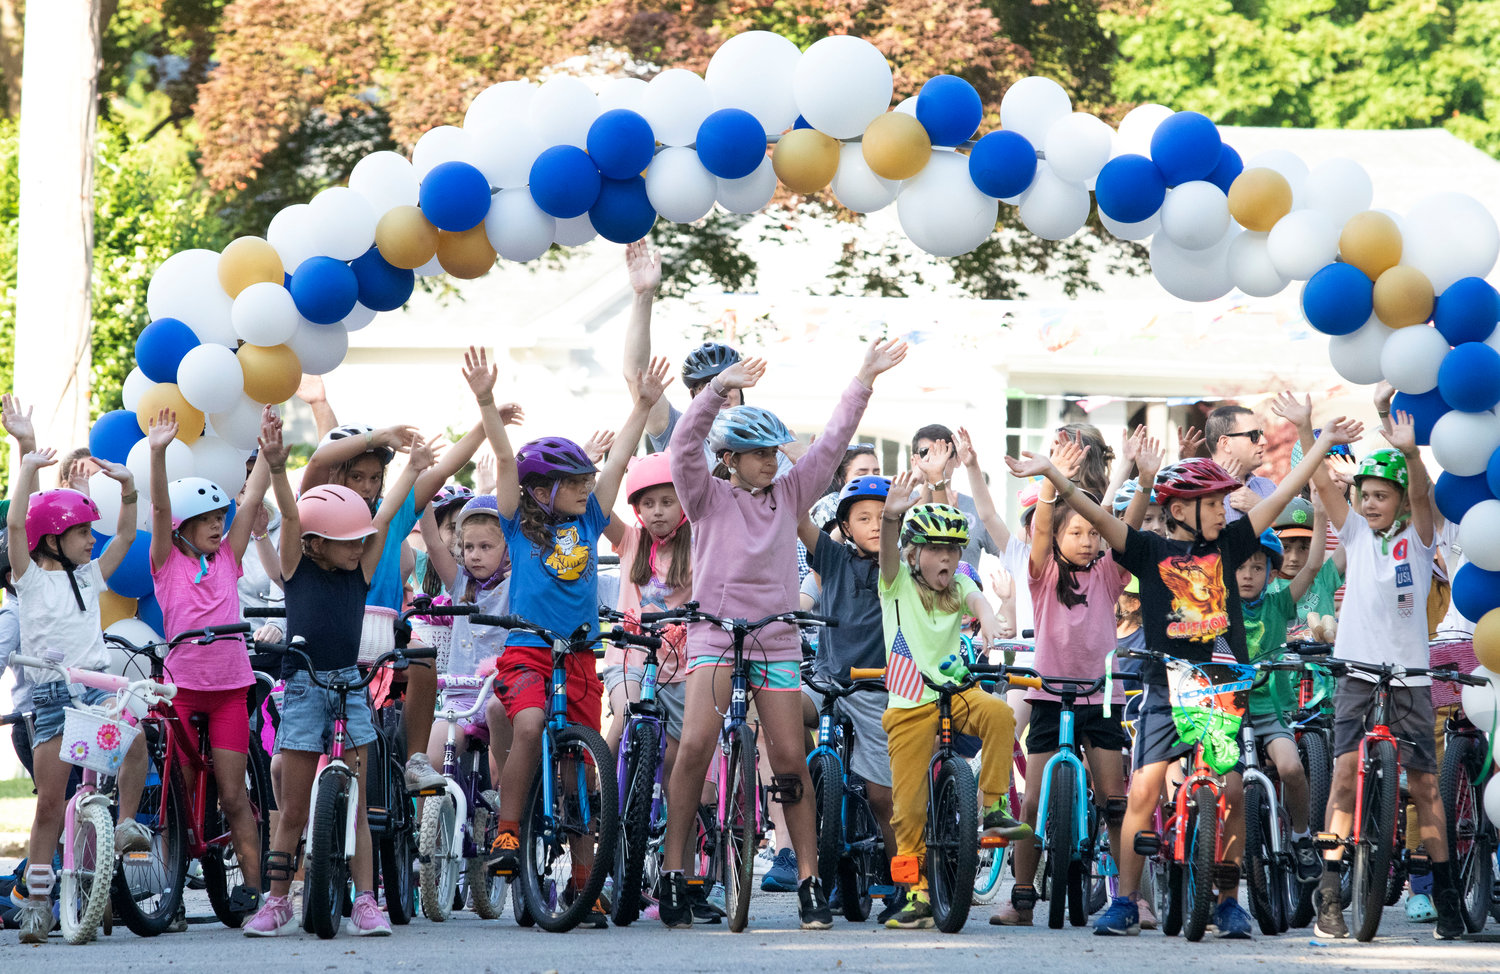 Cyclists line up under the balloons on Riverside Drive and start the ride.